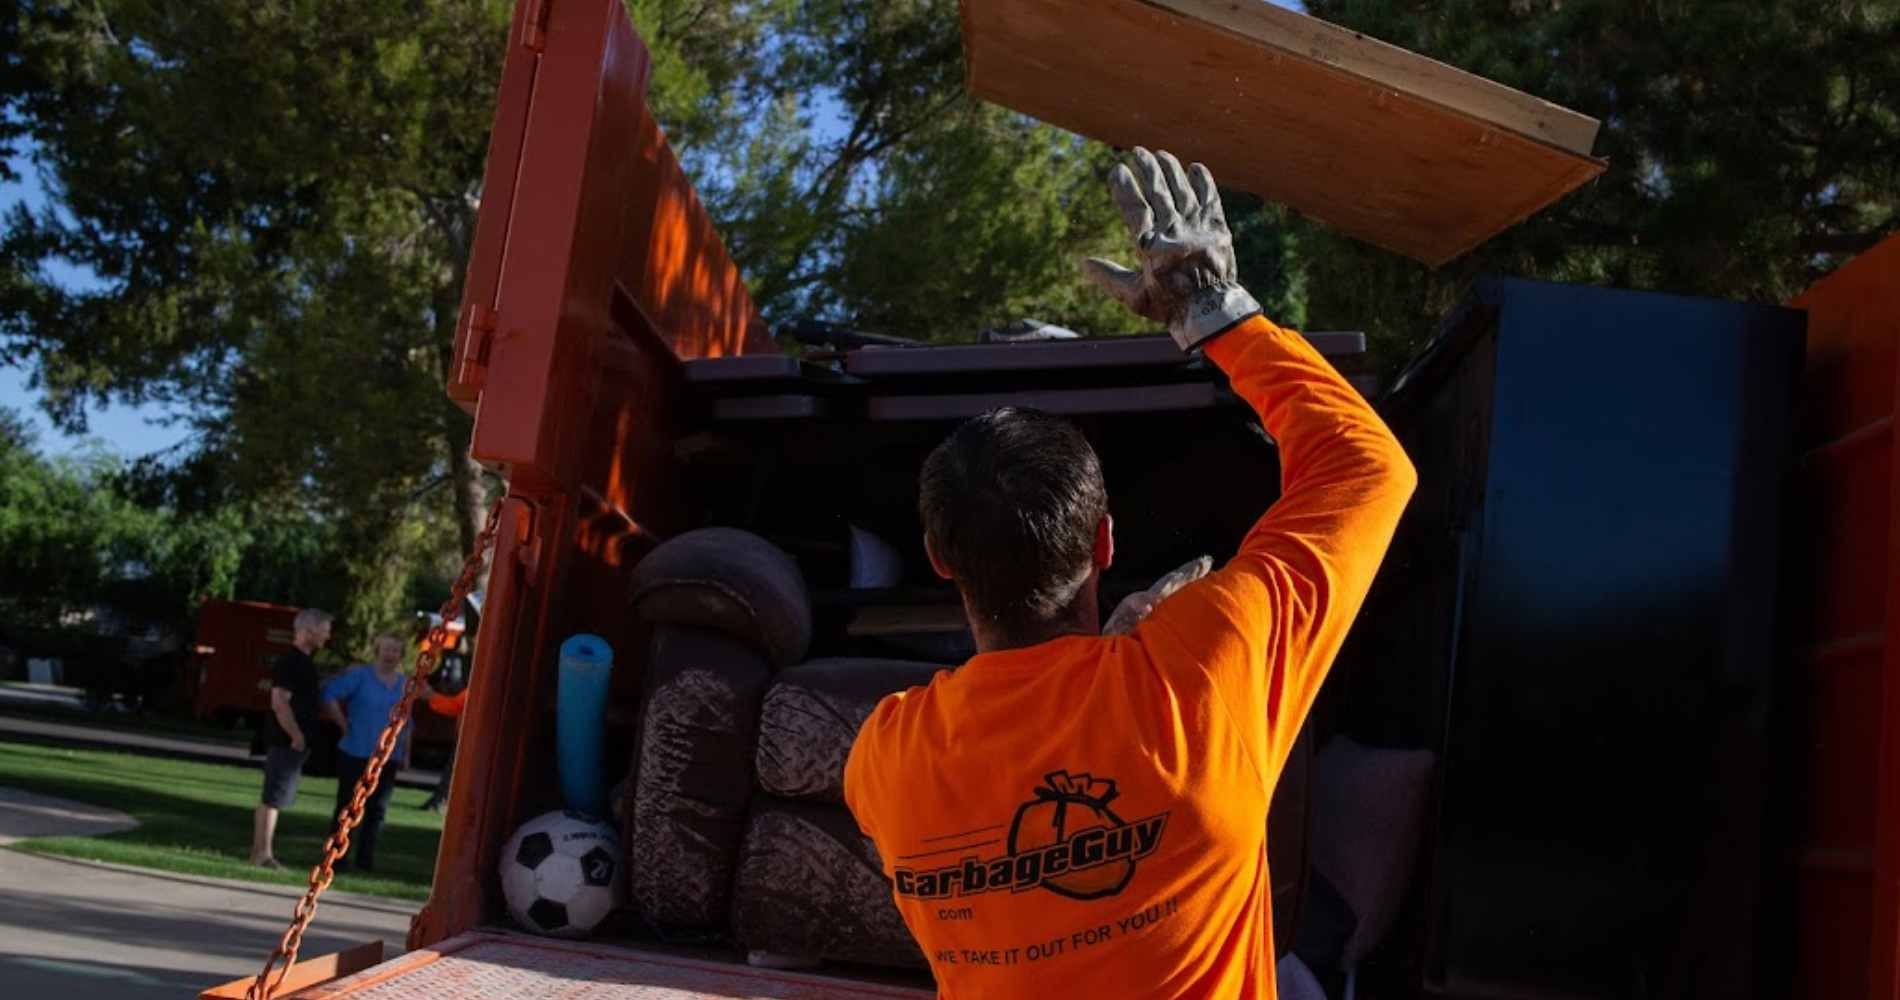 #1 for Eviction Cleanout in Glendale, AZ with Over 1200 5-Star Reviews!